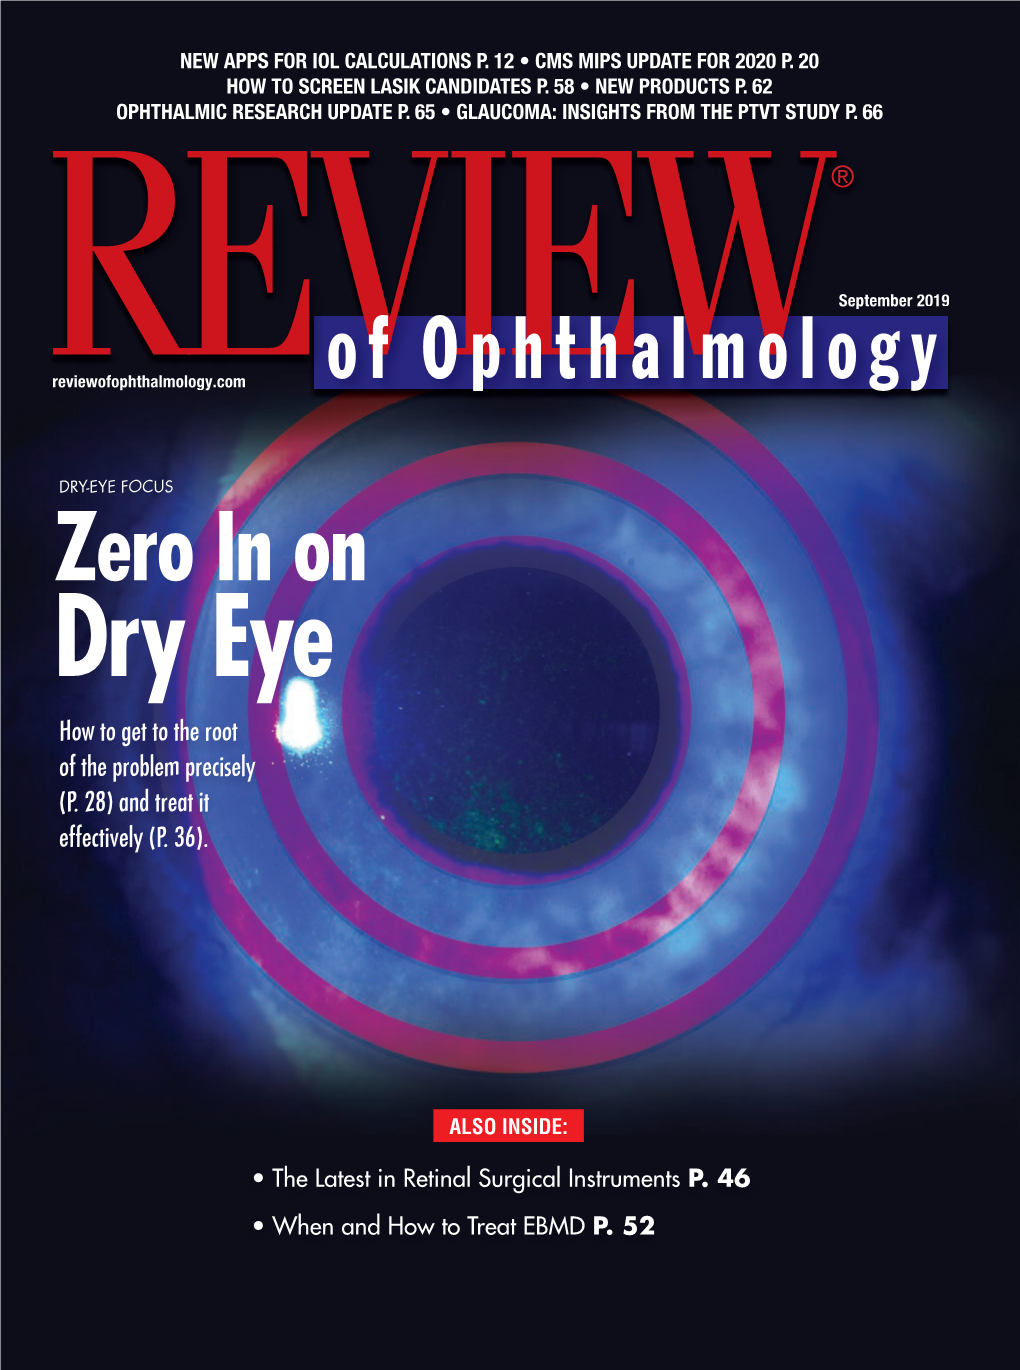 Dry-Eye Diagnosis and Treatmentreview of Ophthalmology Vol